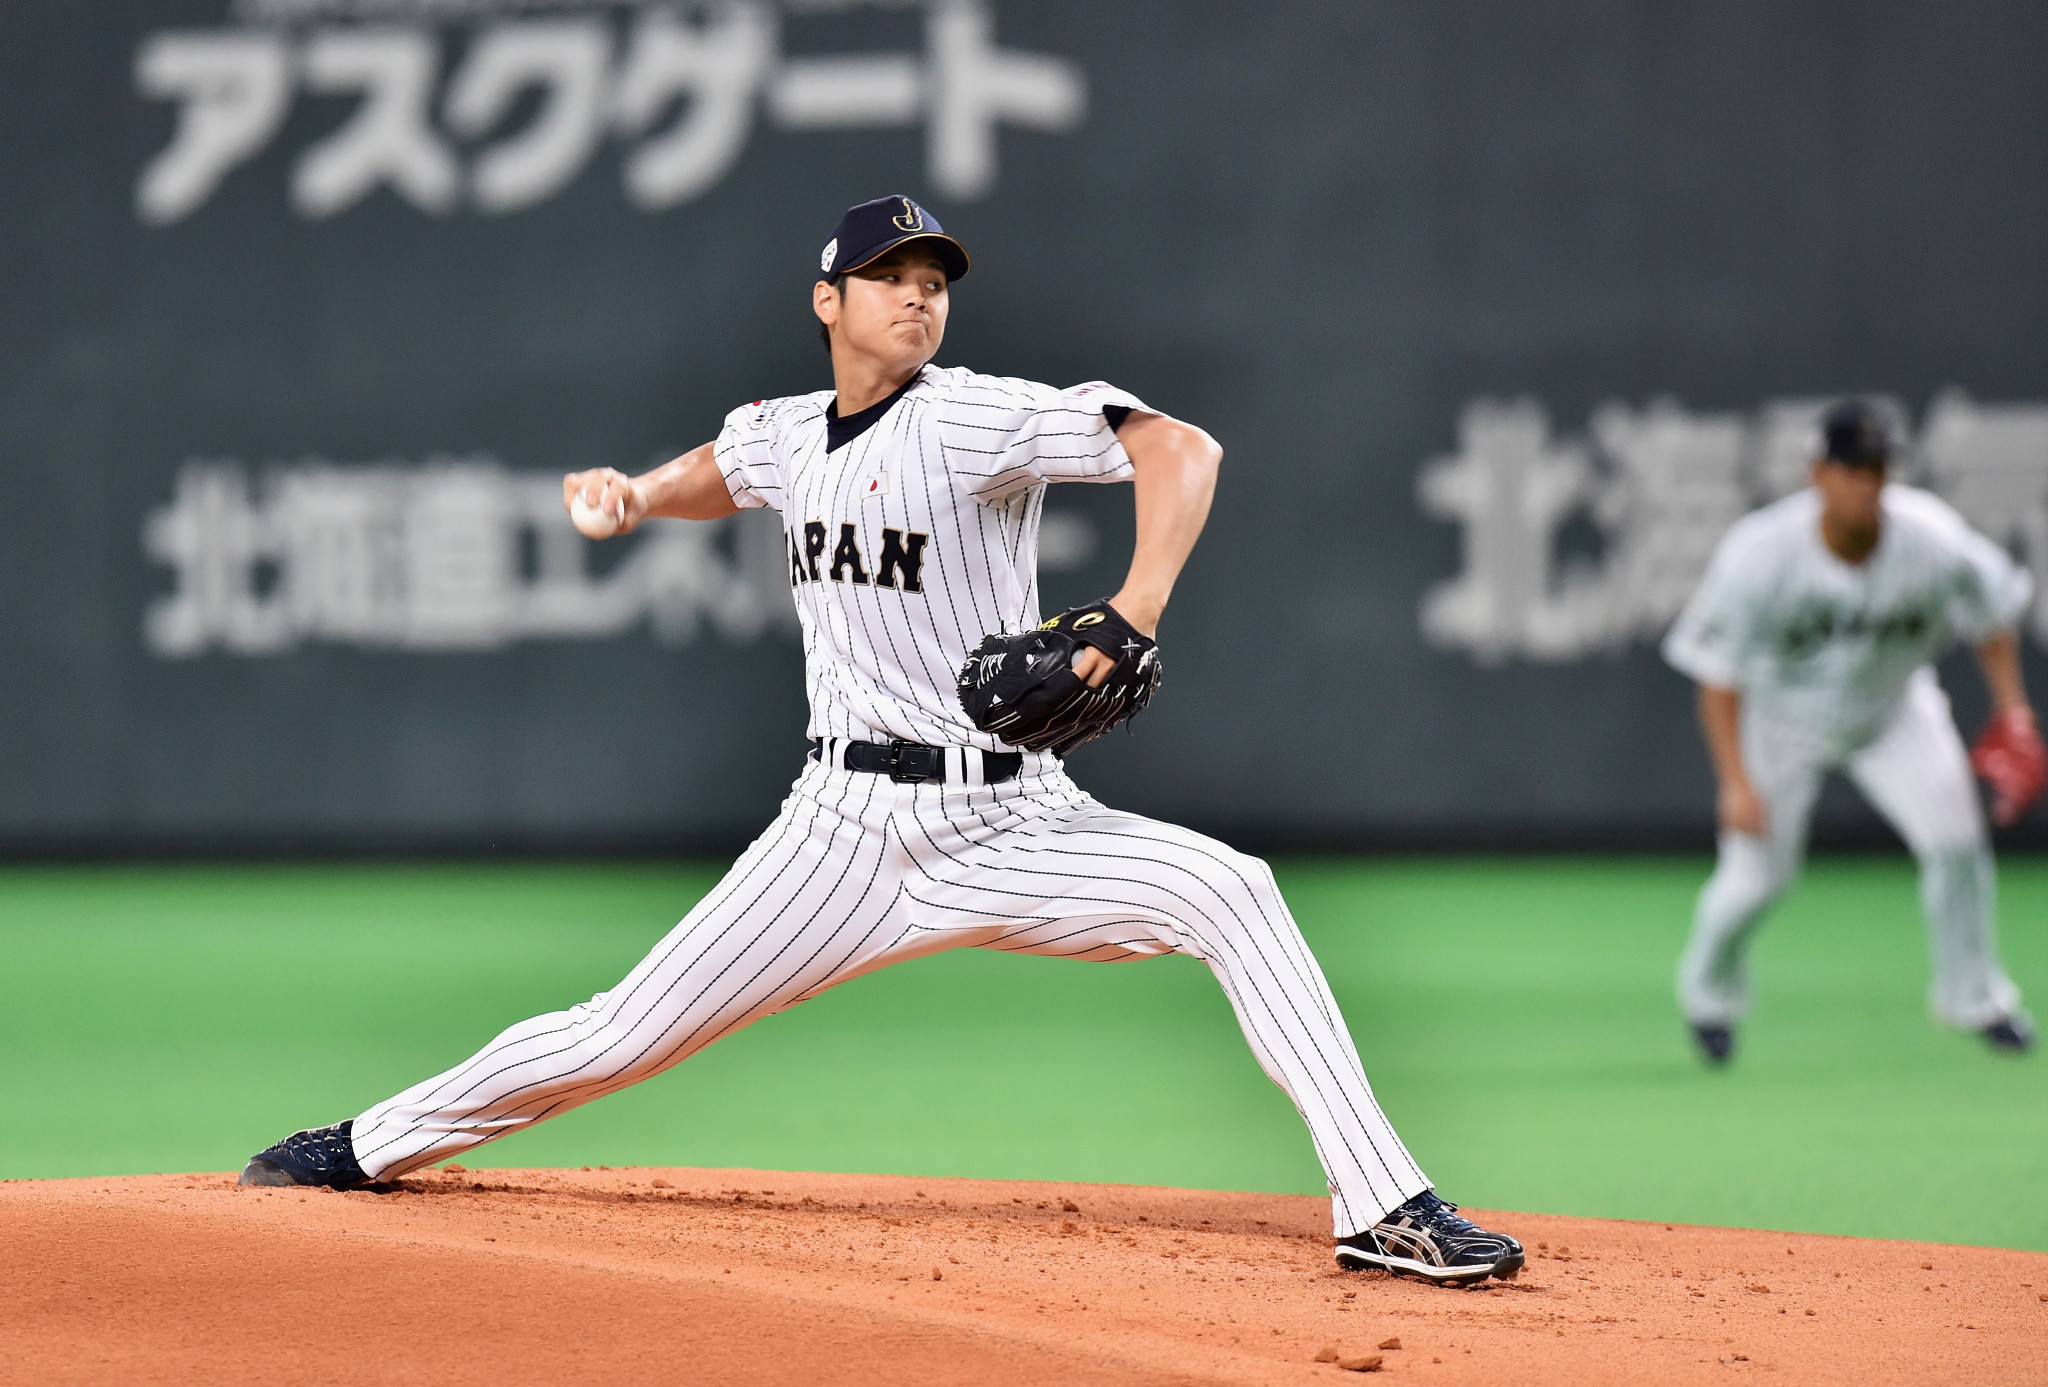 Shohei Ohtani won the award for the best pitcher at the 2015 WBSC Premier12 event - now he leads MLB in home runs hit ©Getty Images